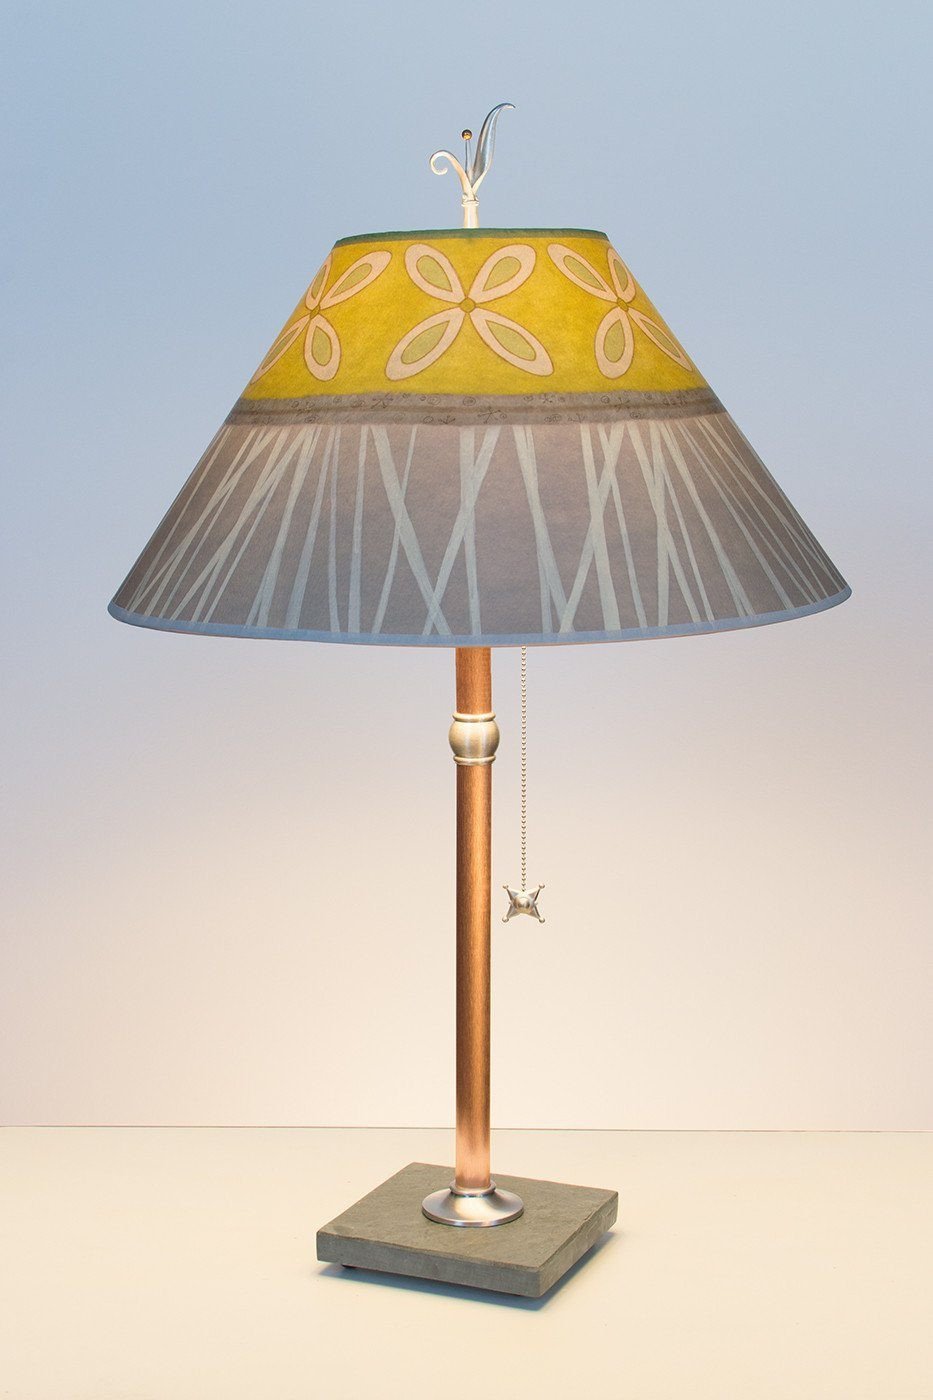 Copper Table Lamp with Large Conical Shade in Kiwi